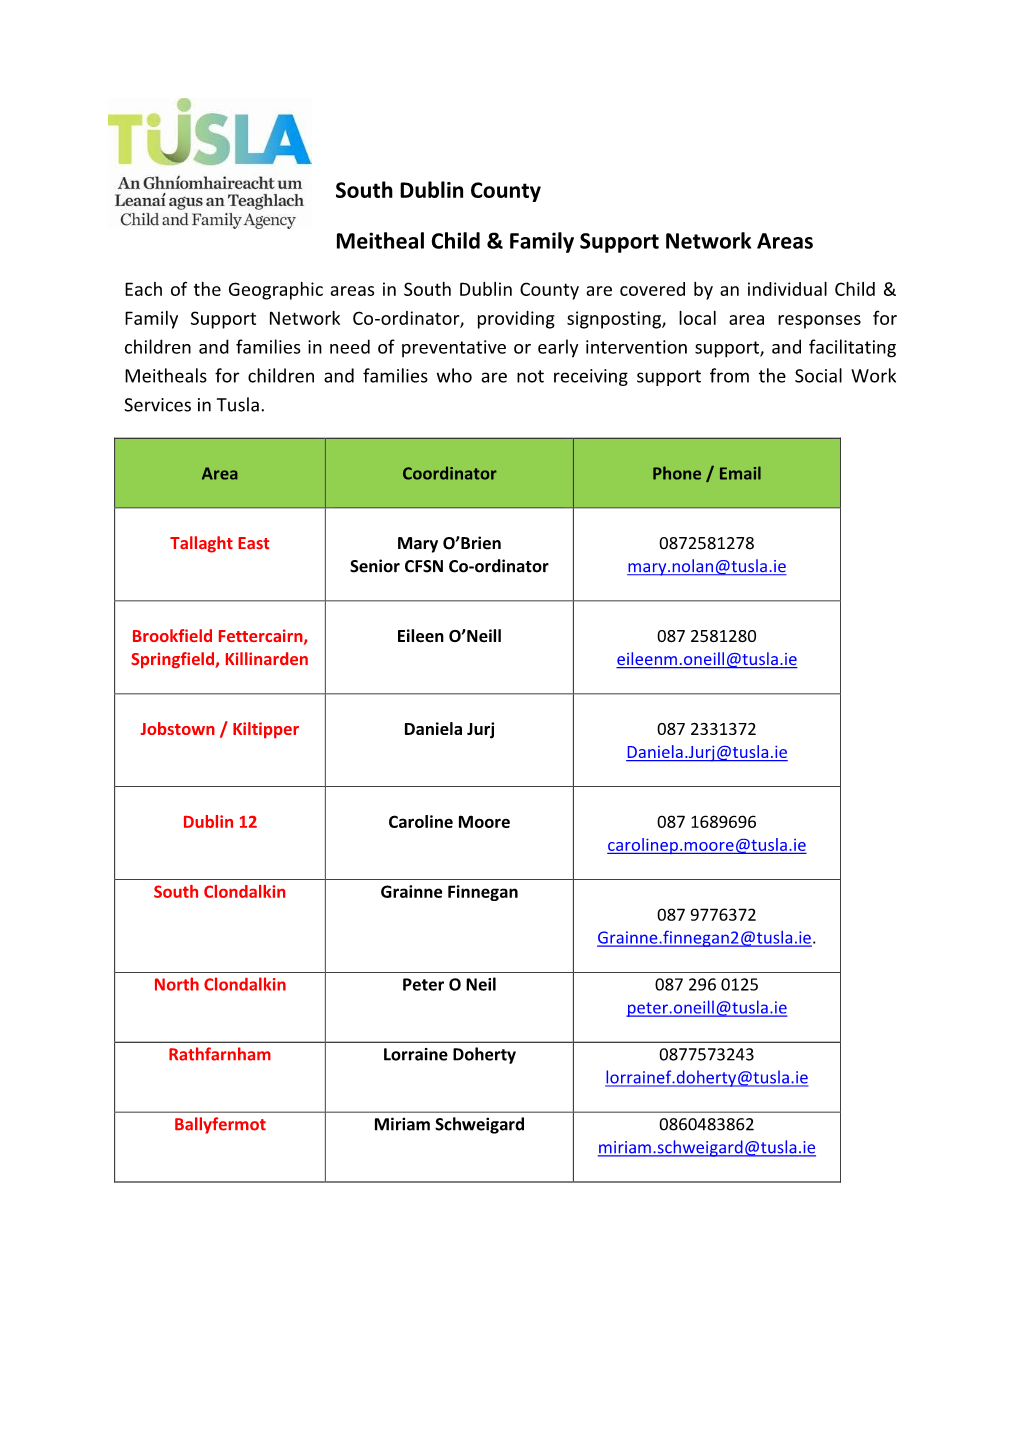 South Dublin County Meitheal Child & Family Support Network Areas